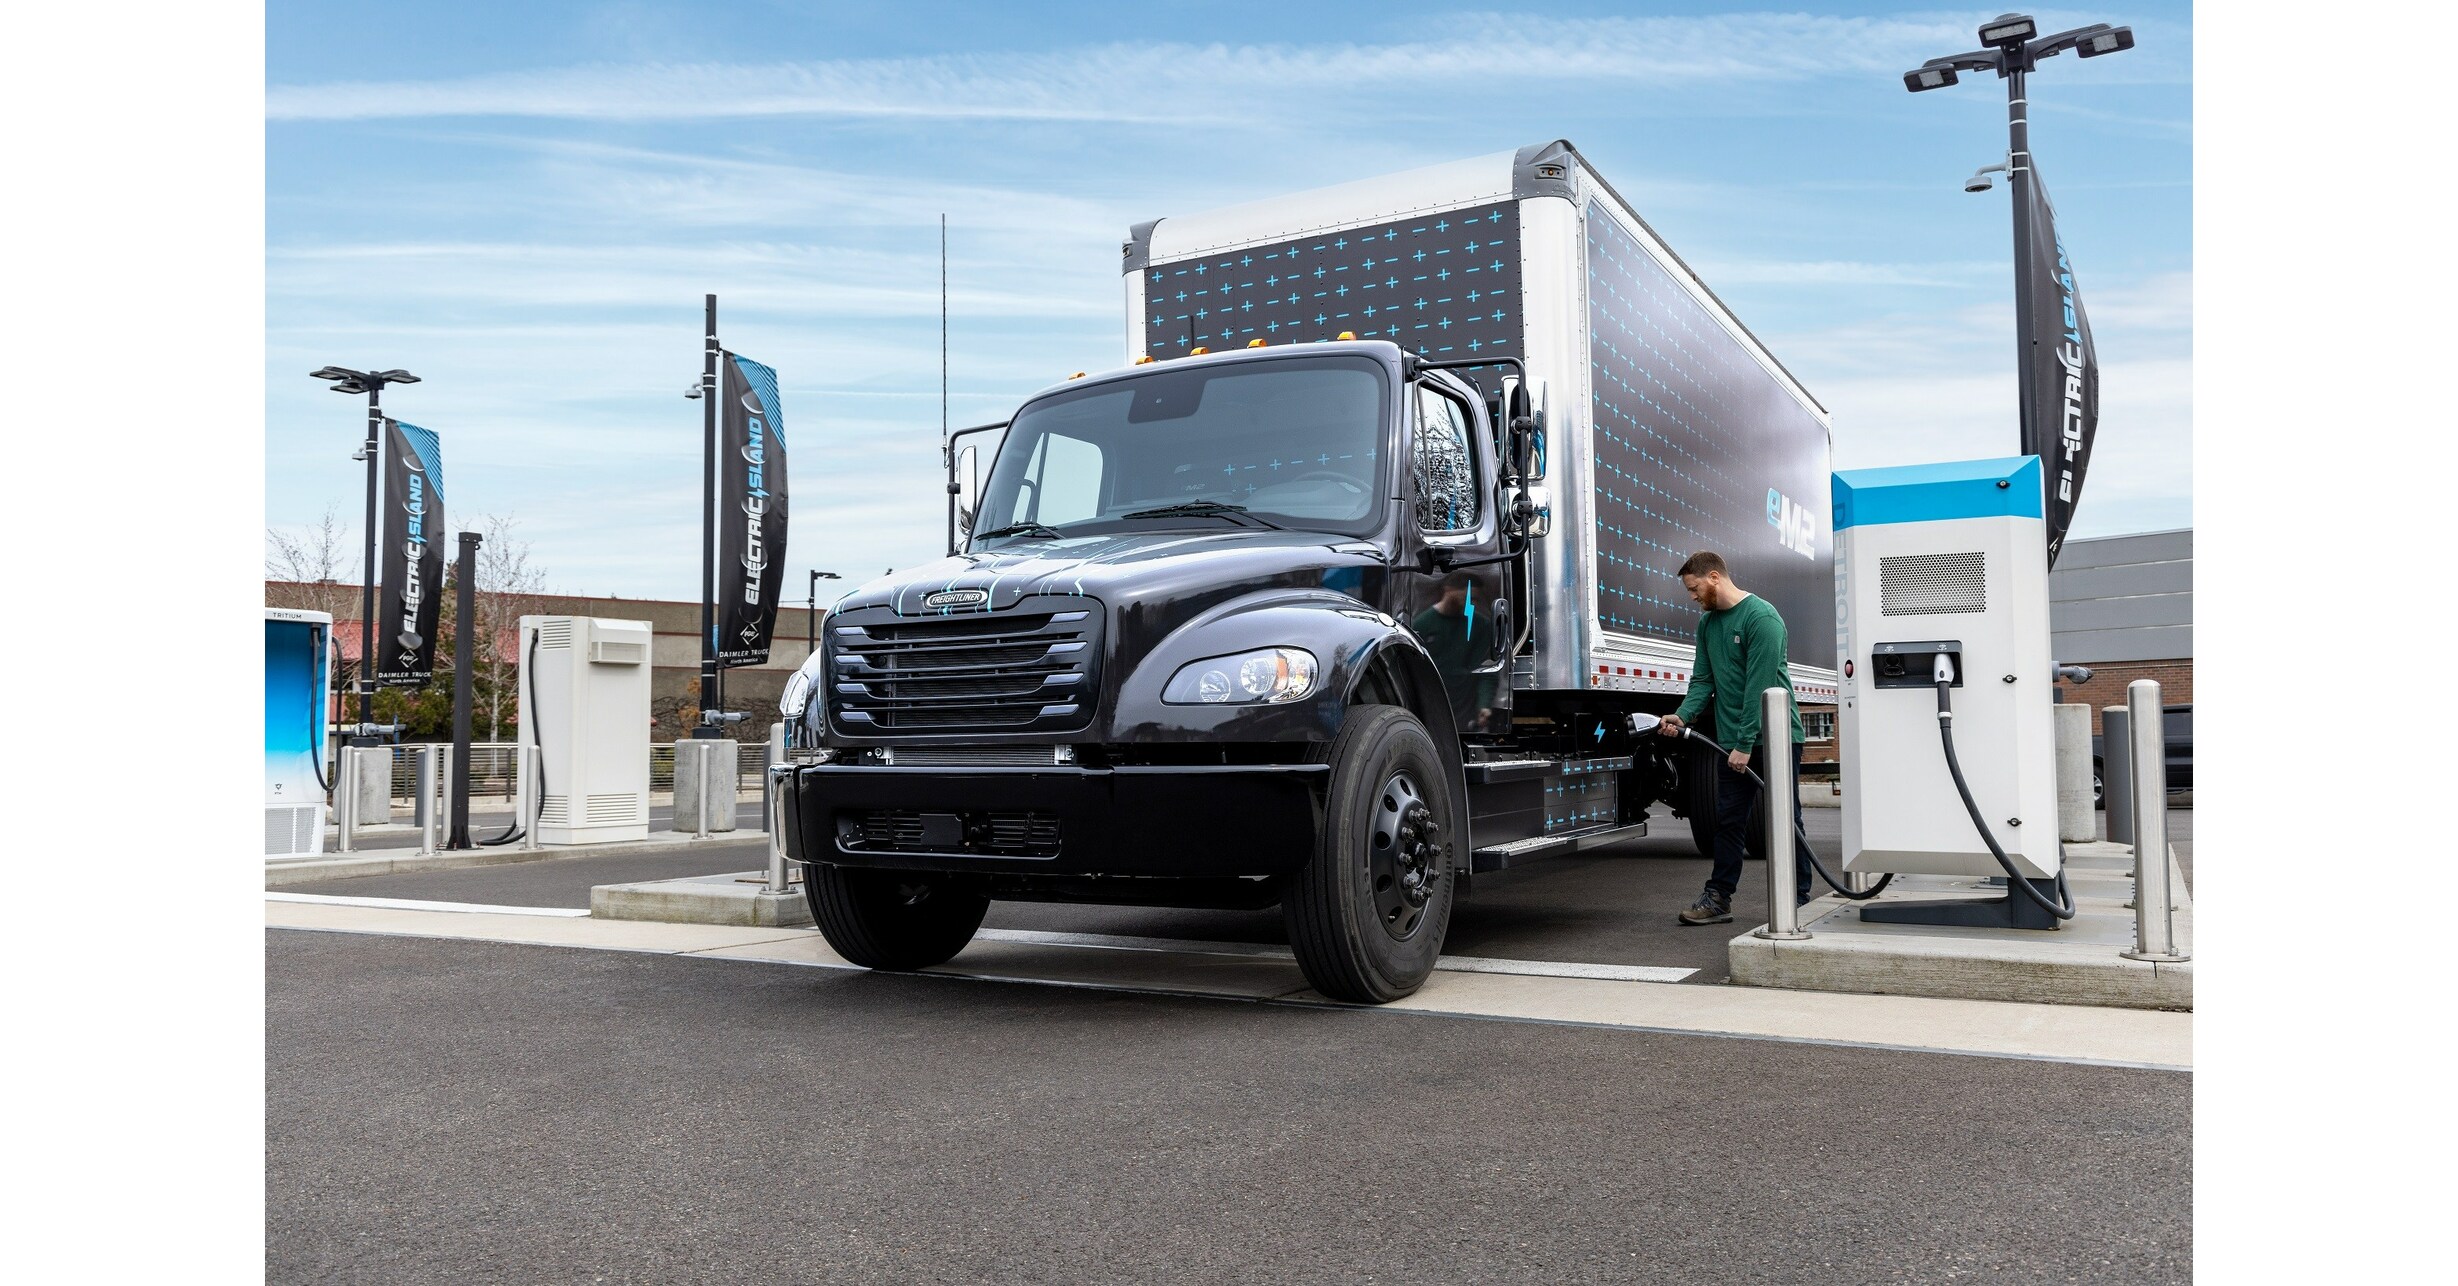 Features That Make Freightliner One of the Safest Semi-Truck Brands